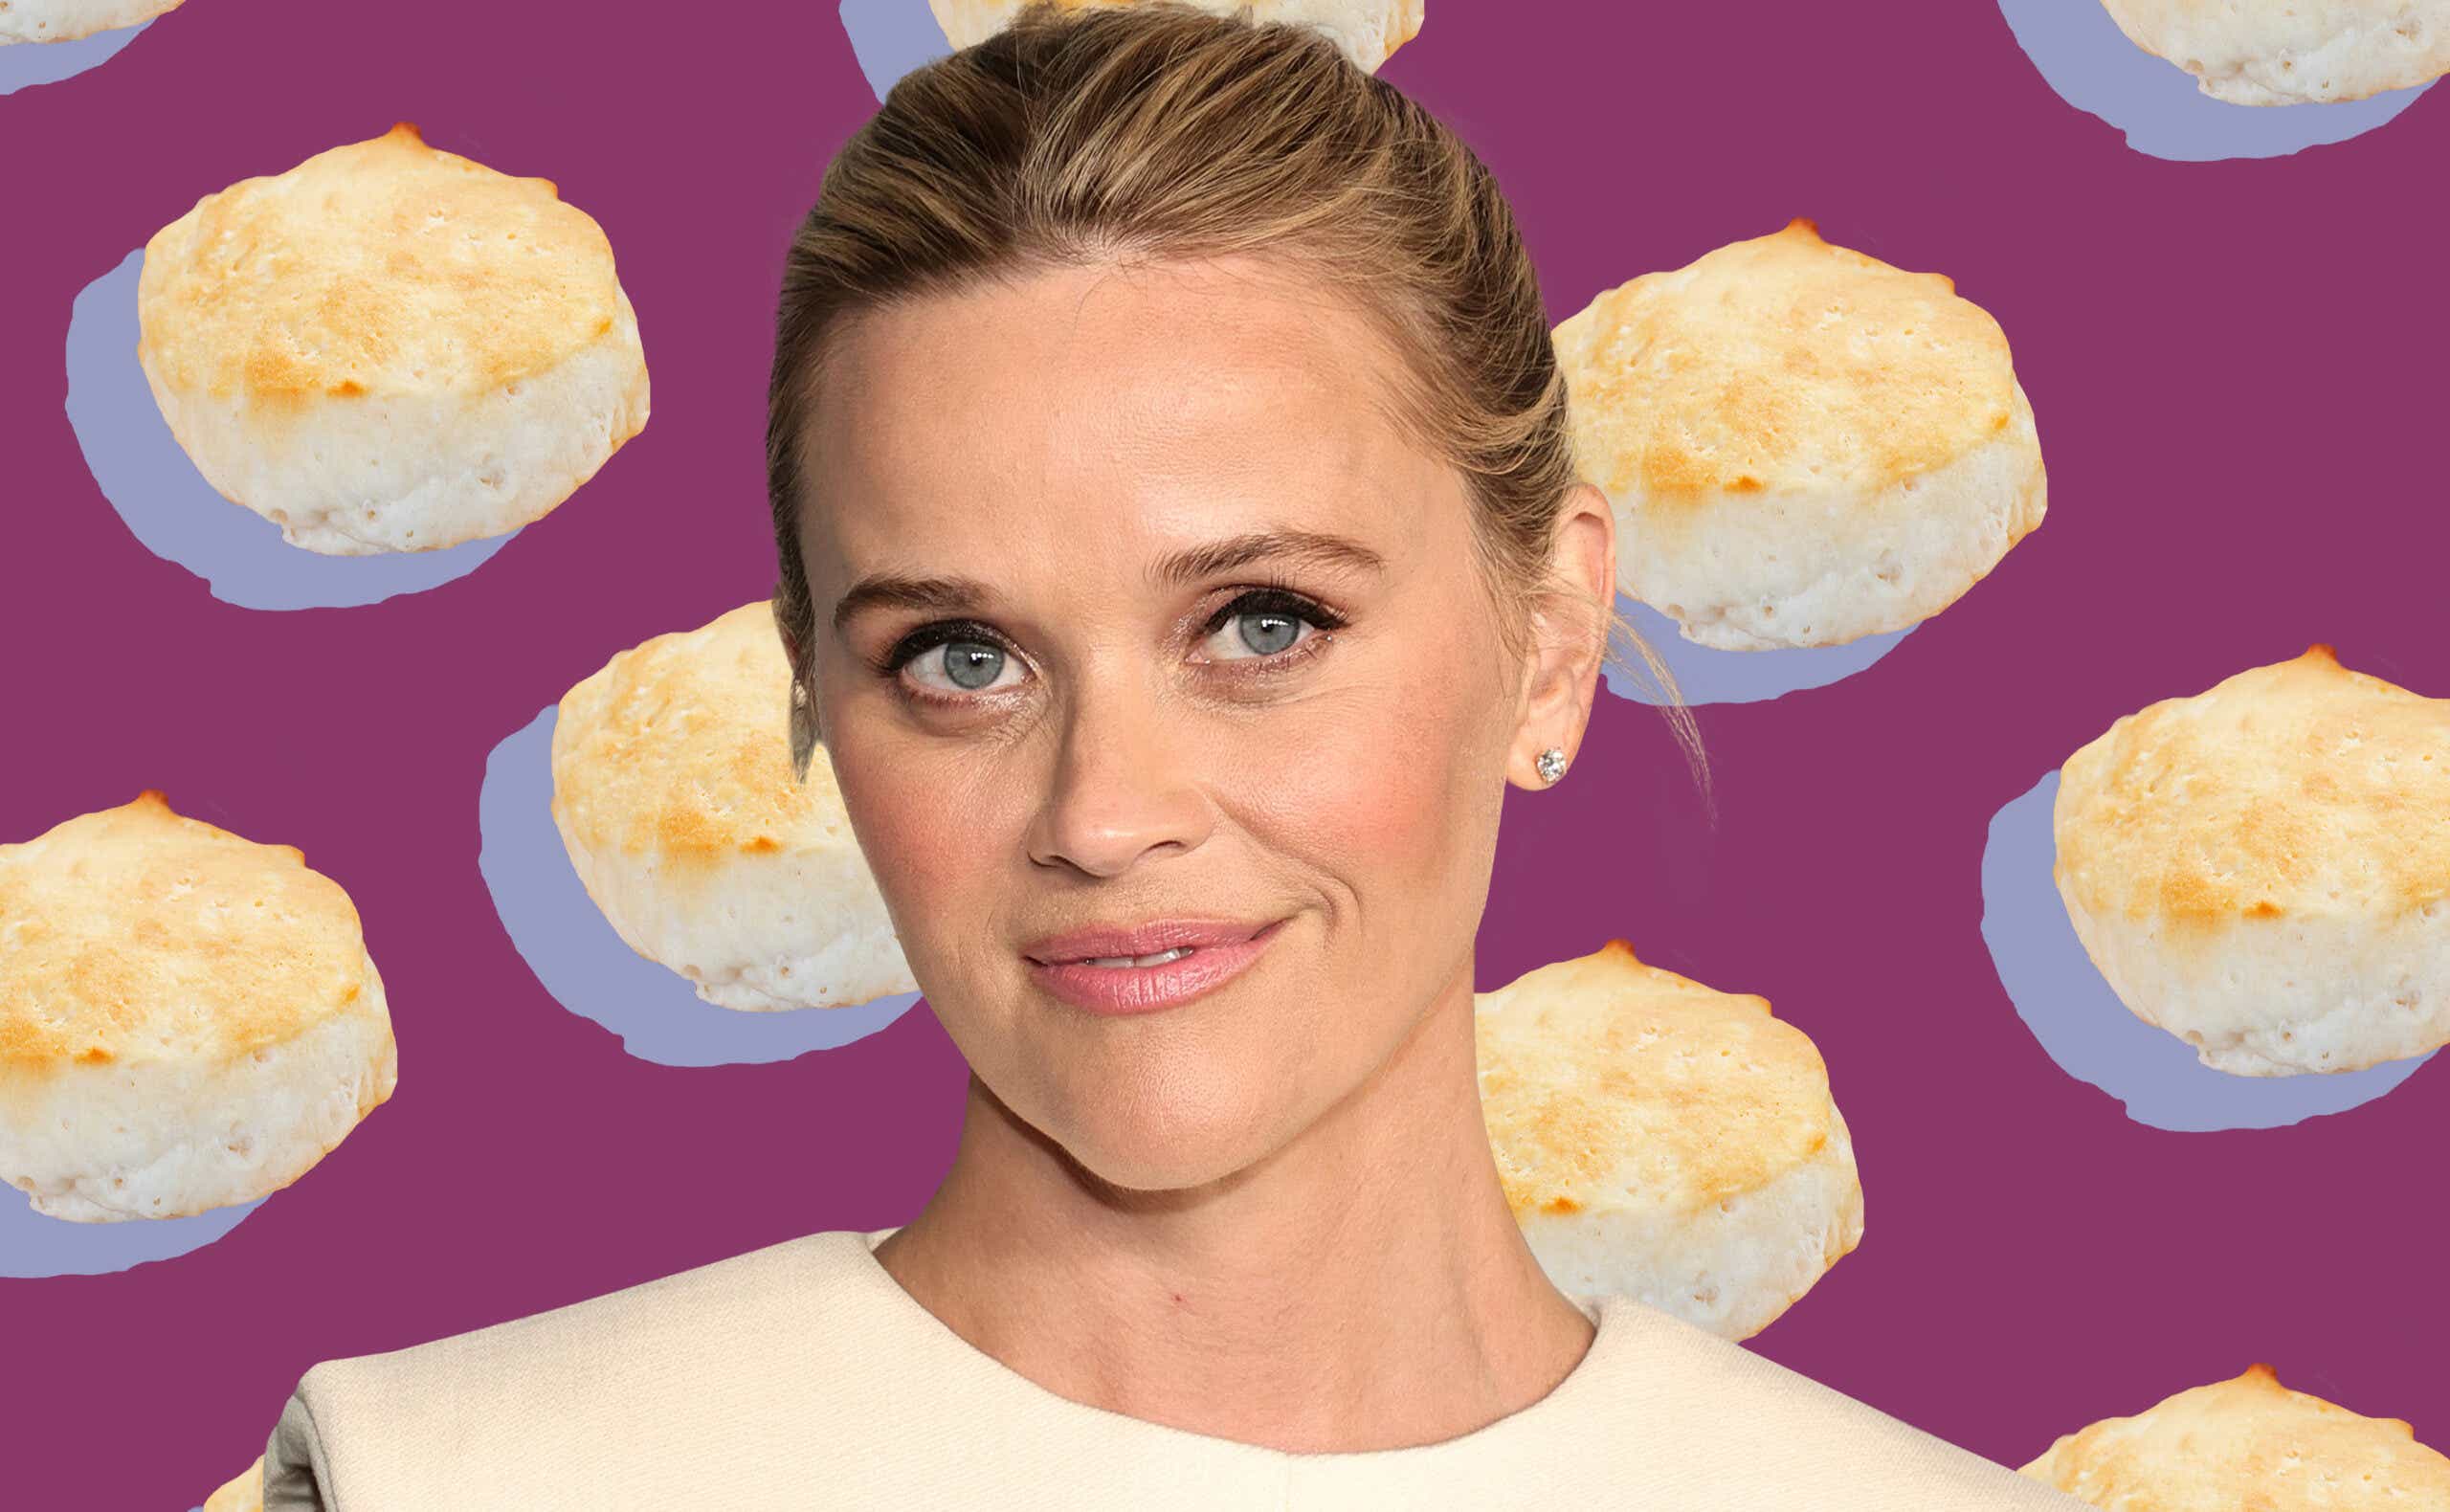 reese witherspoon against a collage of biscuits